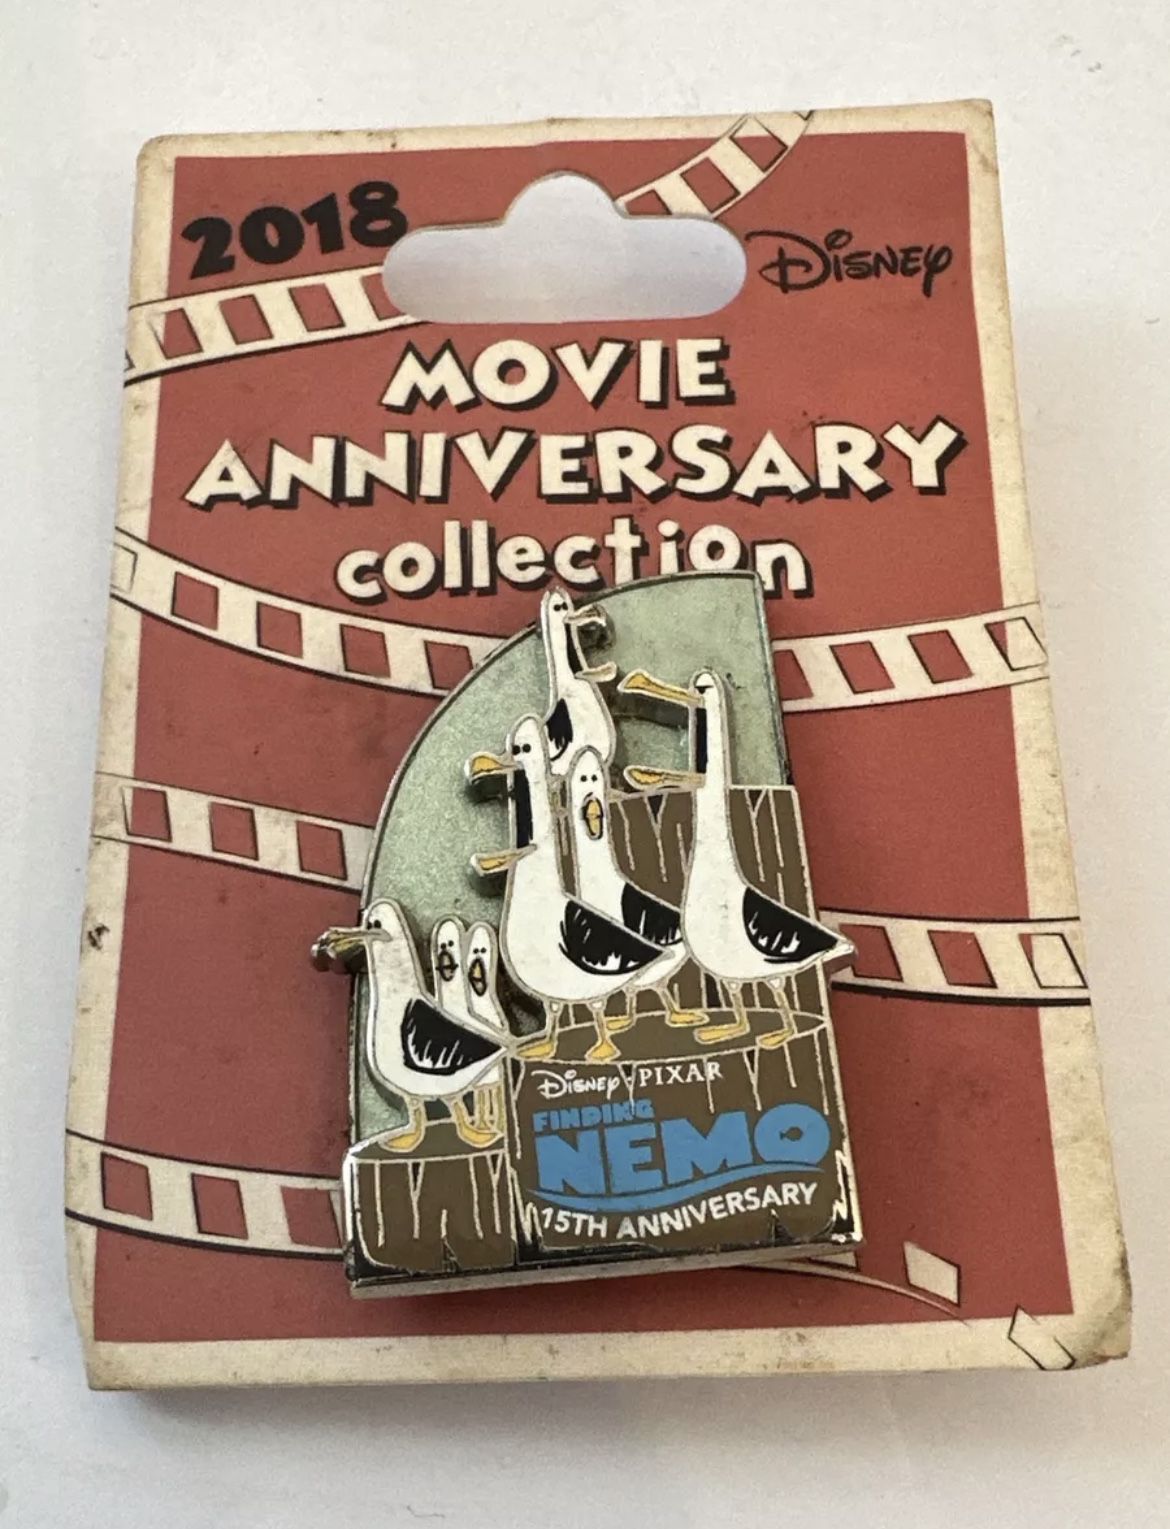 Disney Cast Member Exclusive Finding Nemo 15th Anniversary Limited Edition Pin